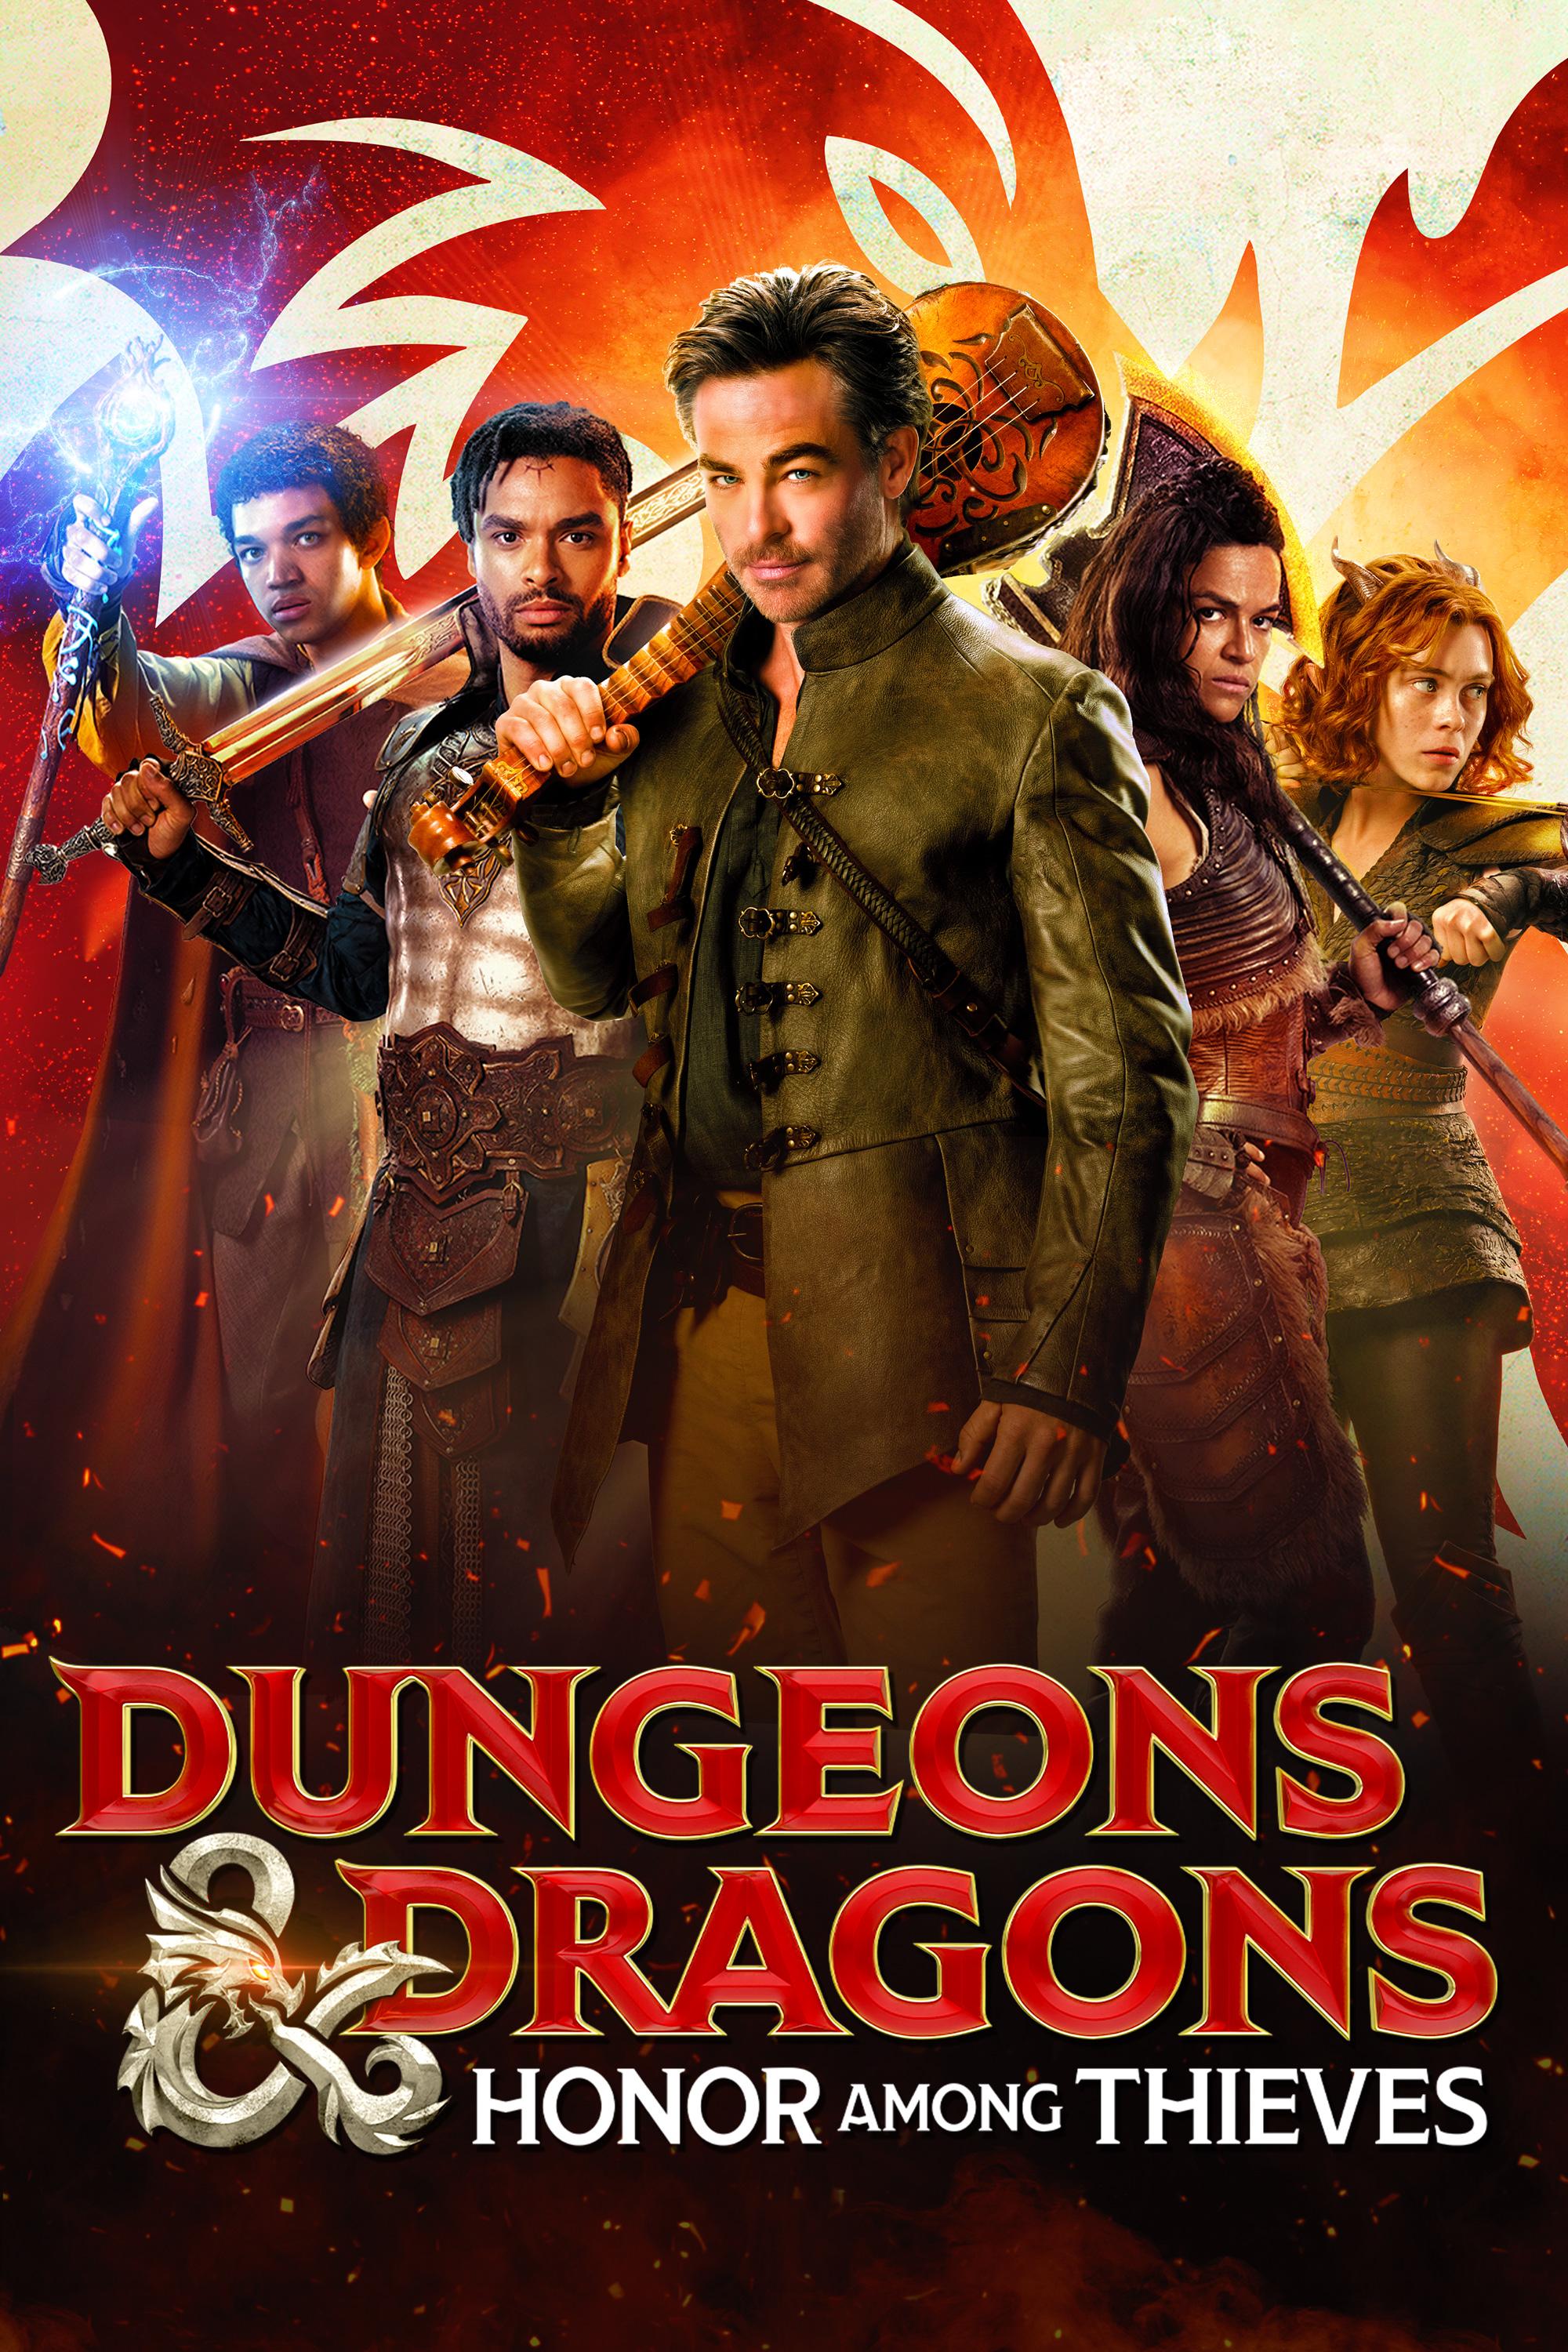 Image for "Dungeons & Dragons: Honor Among Thieves"